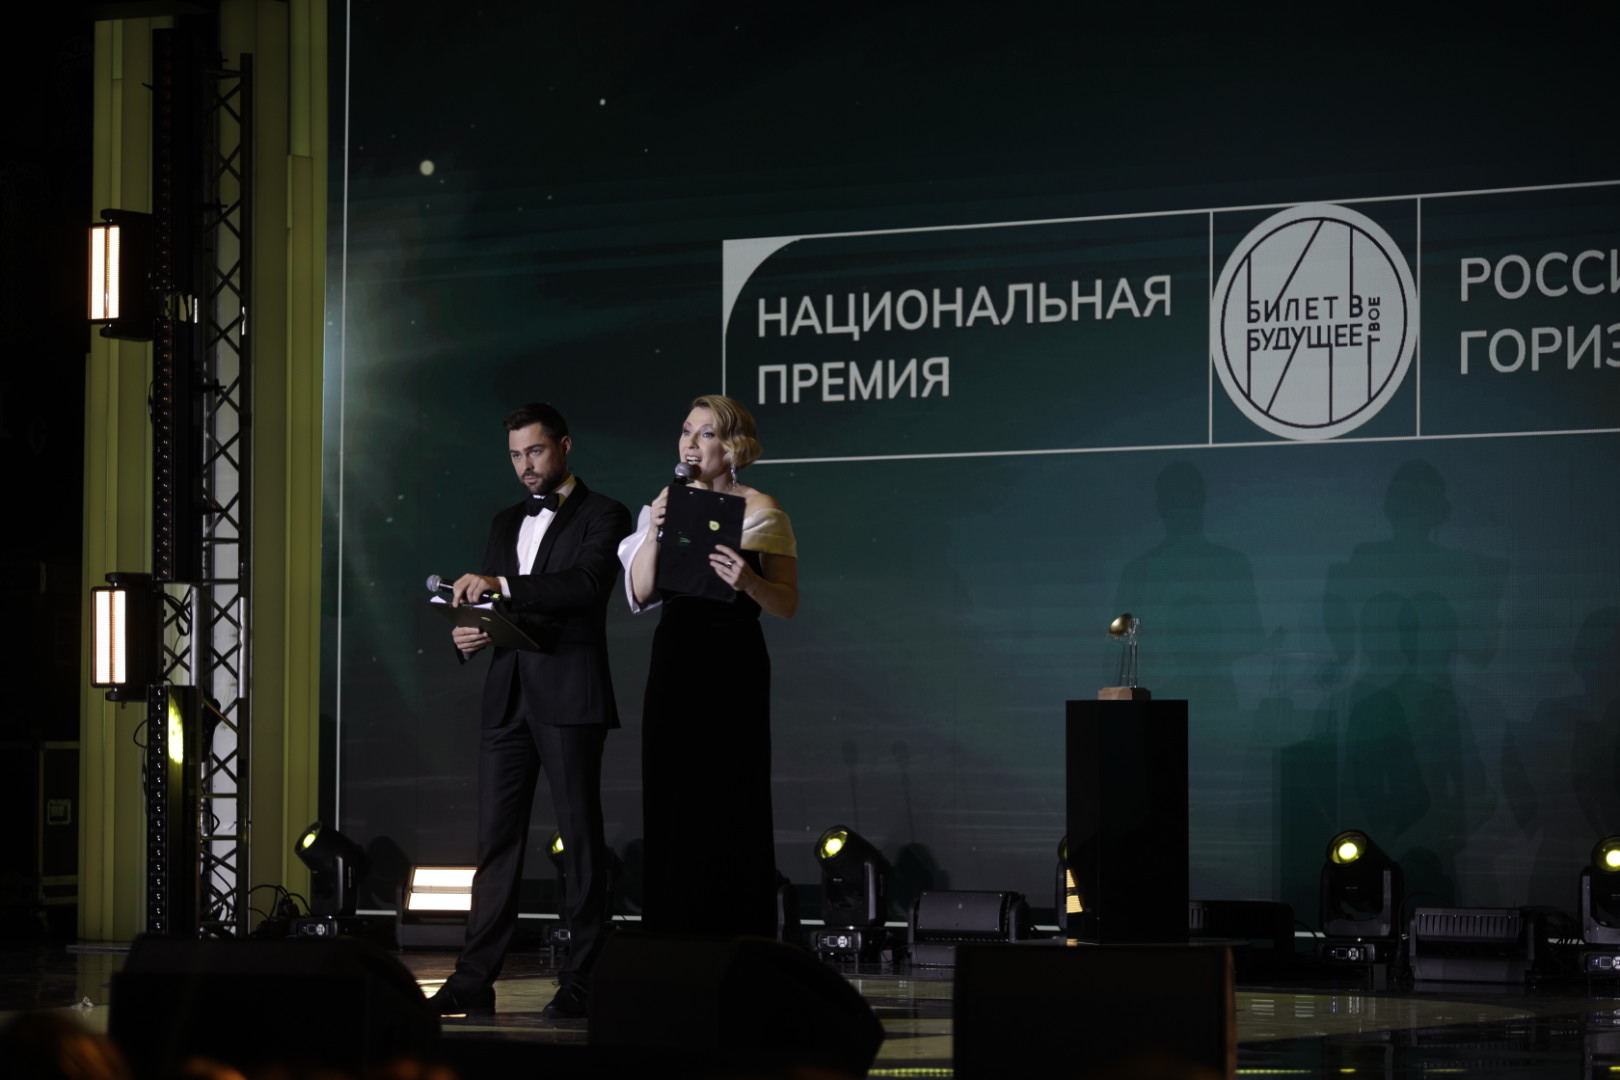 The results of the National Prize “Russia – My Horizons” were collected in Moscow